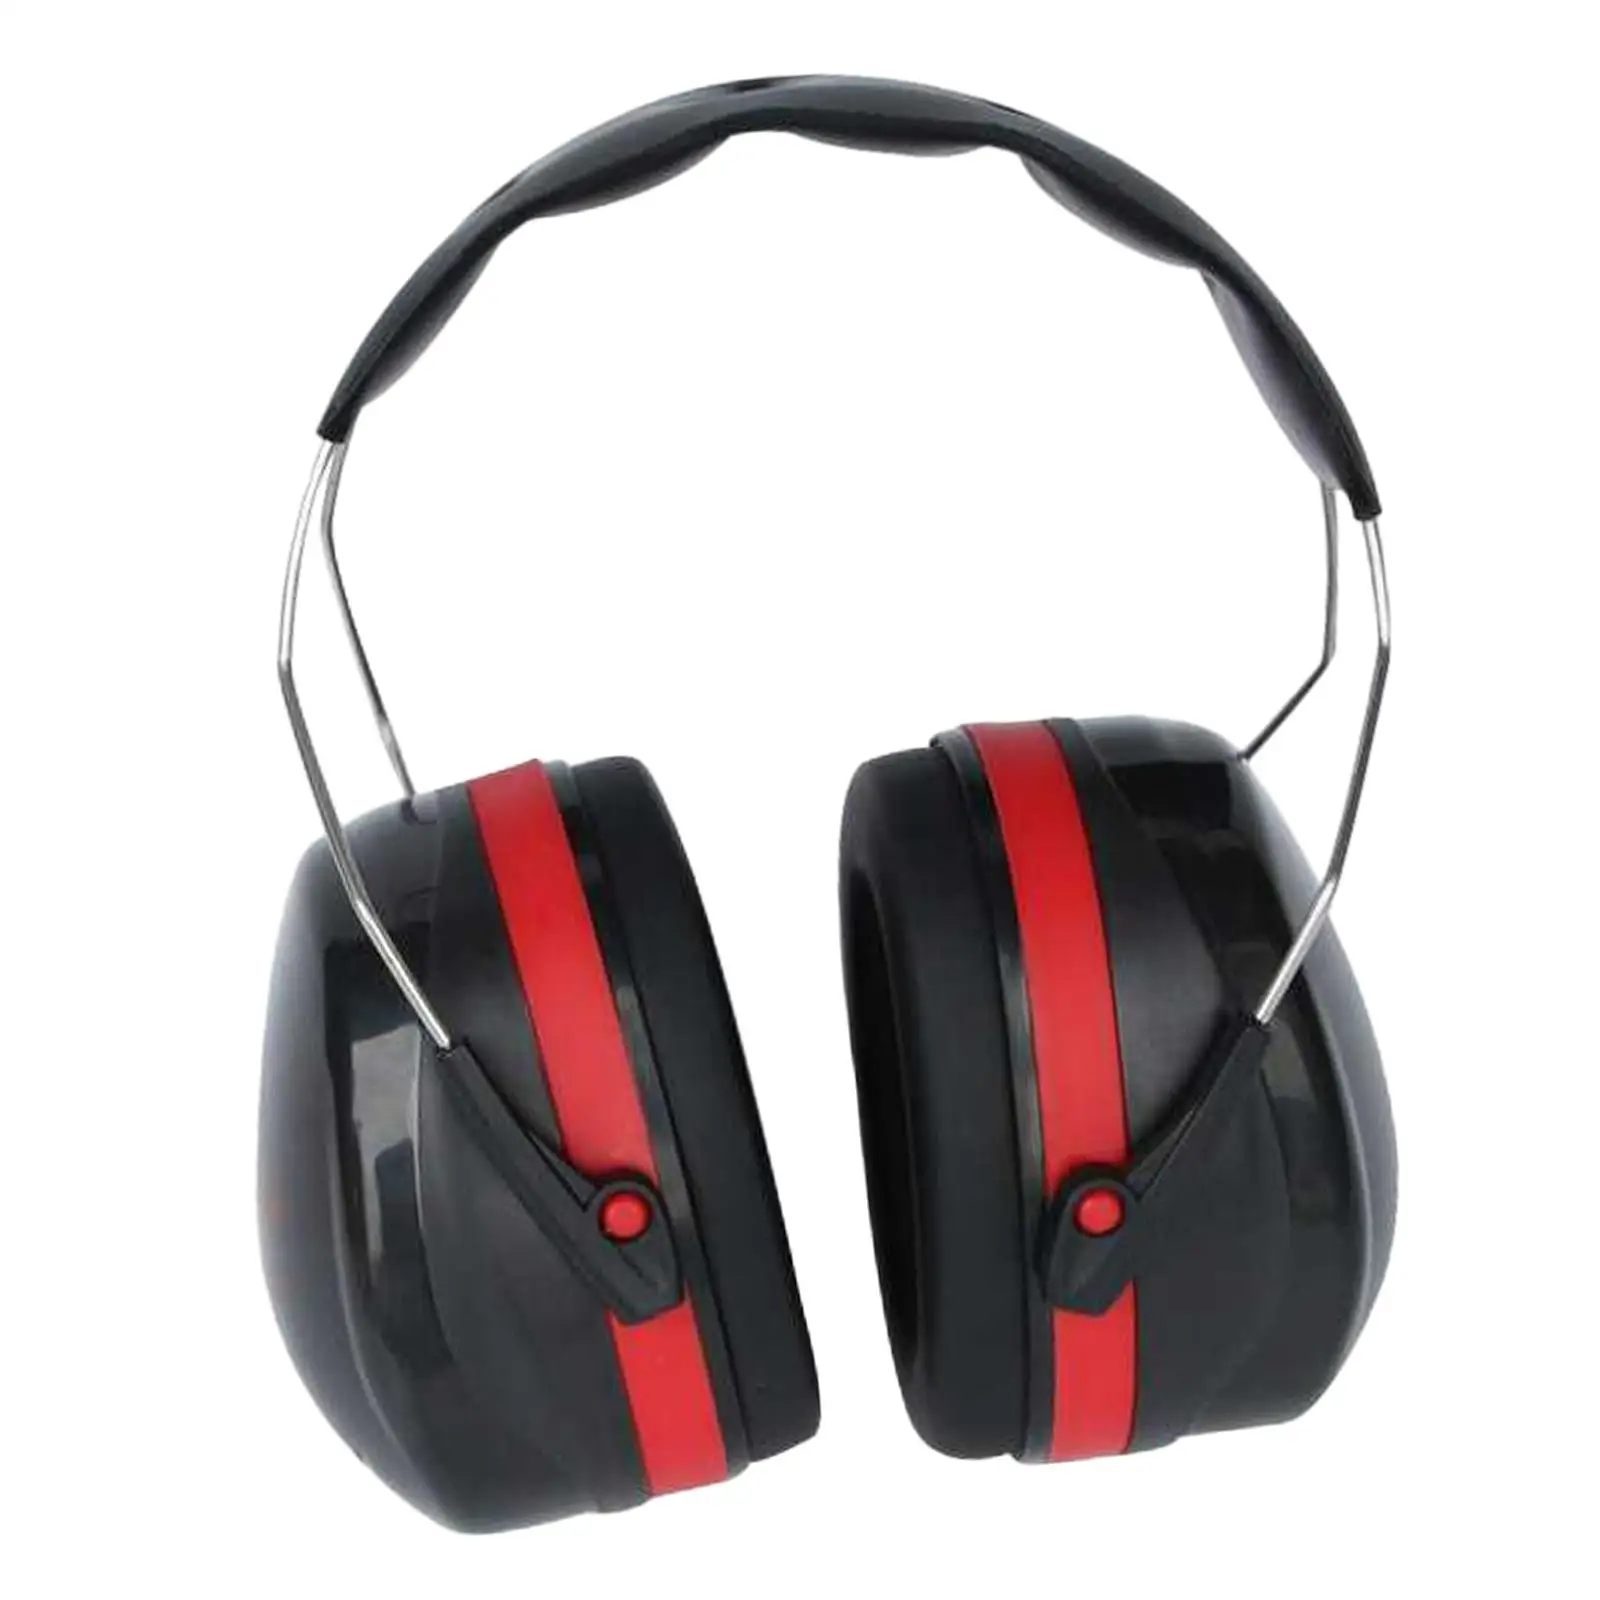 Noise Reduction Headphones Sound Blocking No Pressure to Wear 35dB Earmuffs for Workshop Sleeping Mowing Lawn Airplane Play Drum